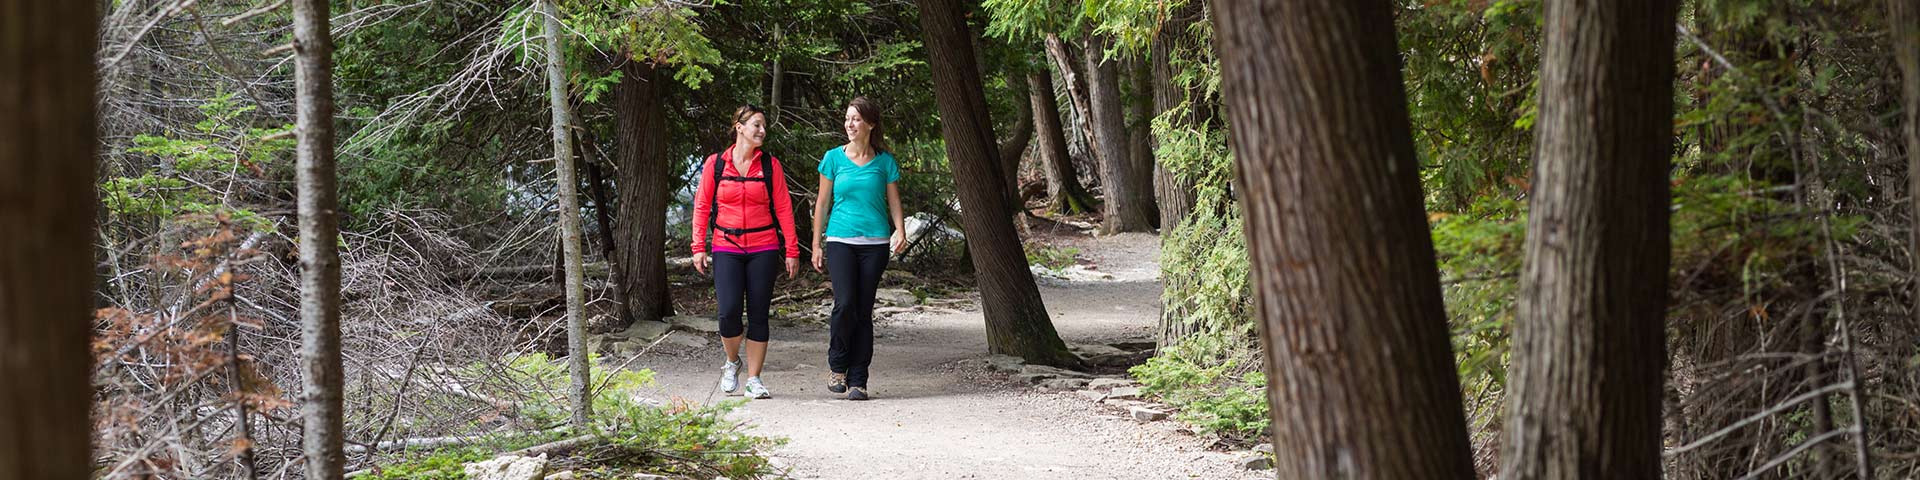 Two women hike through a forest